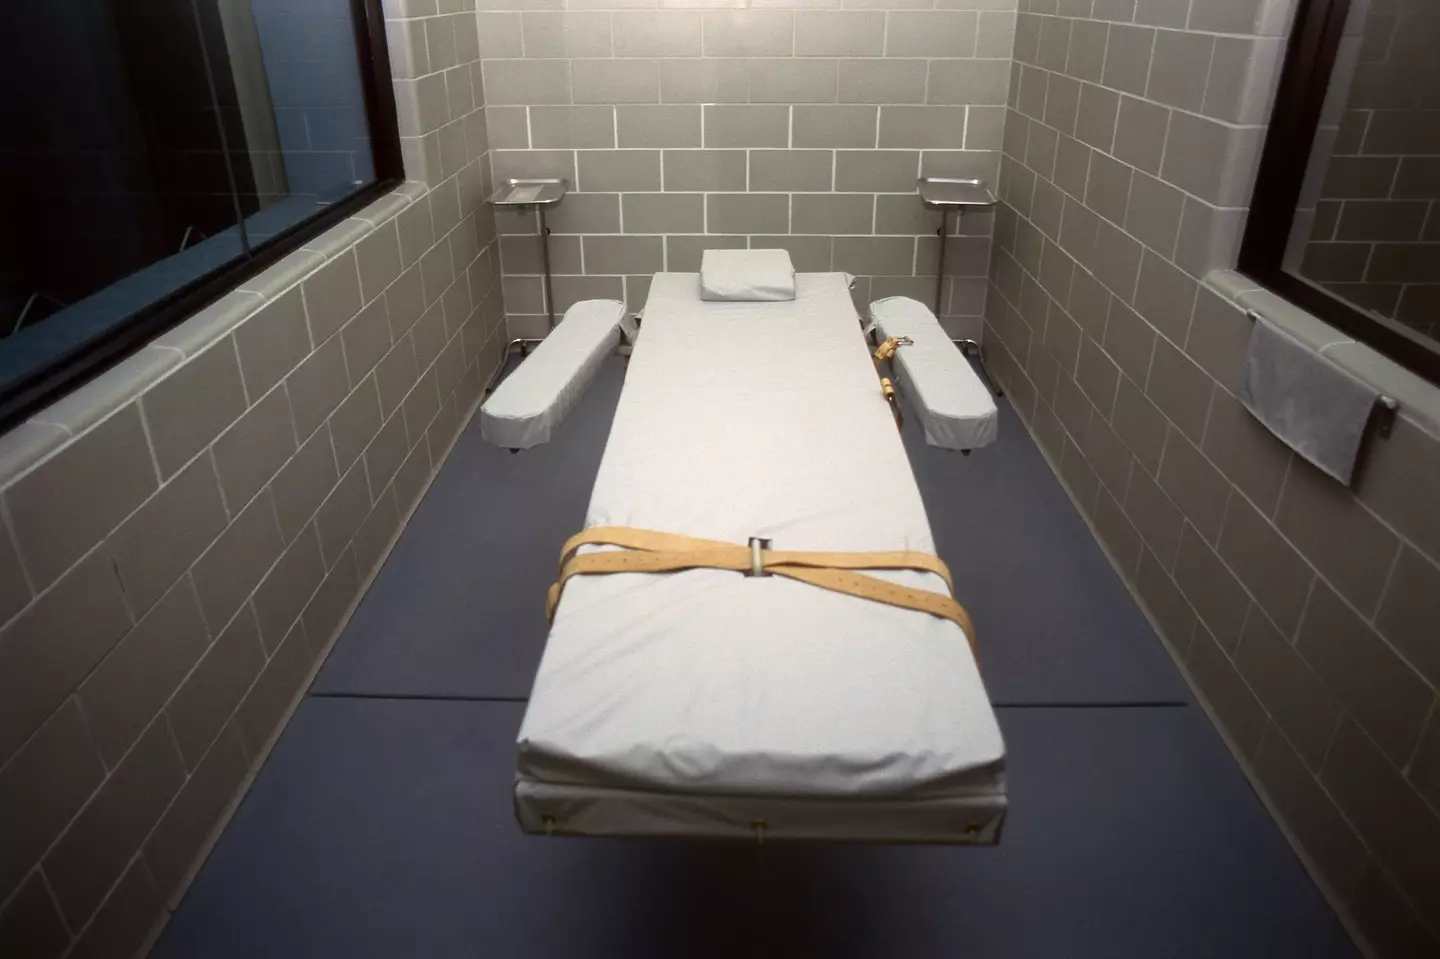 Lethal injection chamber in Arizona State Prison, Florence.